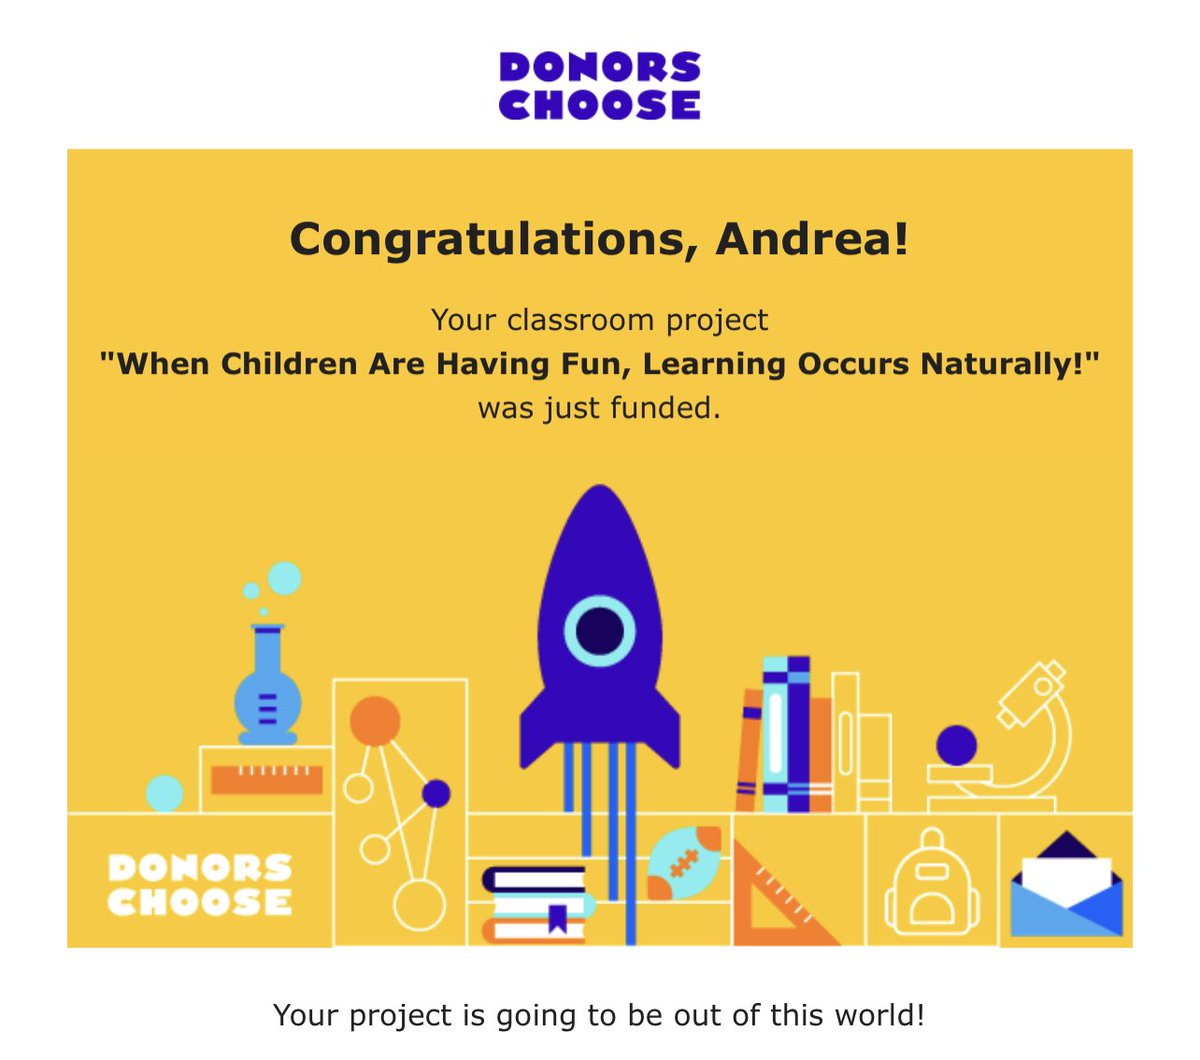 We have lift off! Thank you all so much! @DonorsChoose